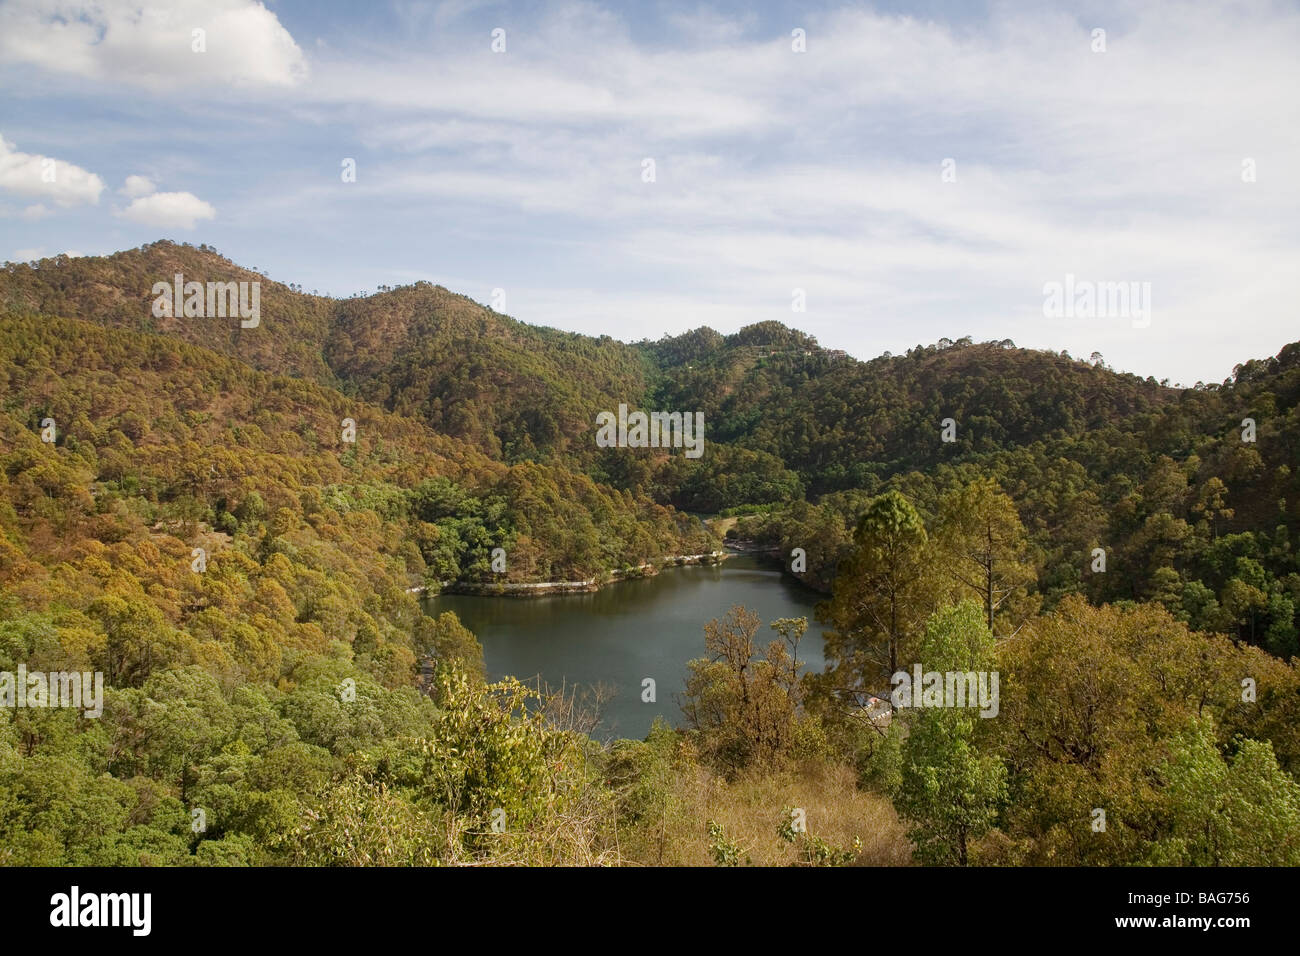 Sattal or Sat taal  are lakes situated in the Lower Himalayan Range near Bhimtal, a town of the Nainital district in Uttarakhand, India. Stock Photo